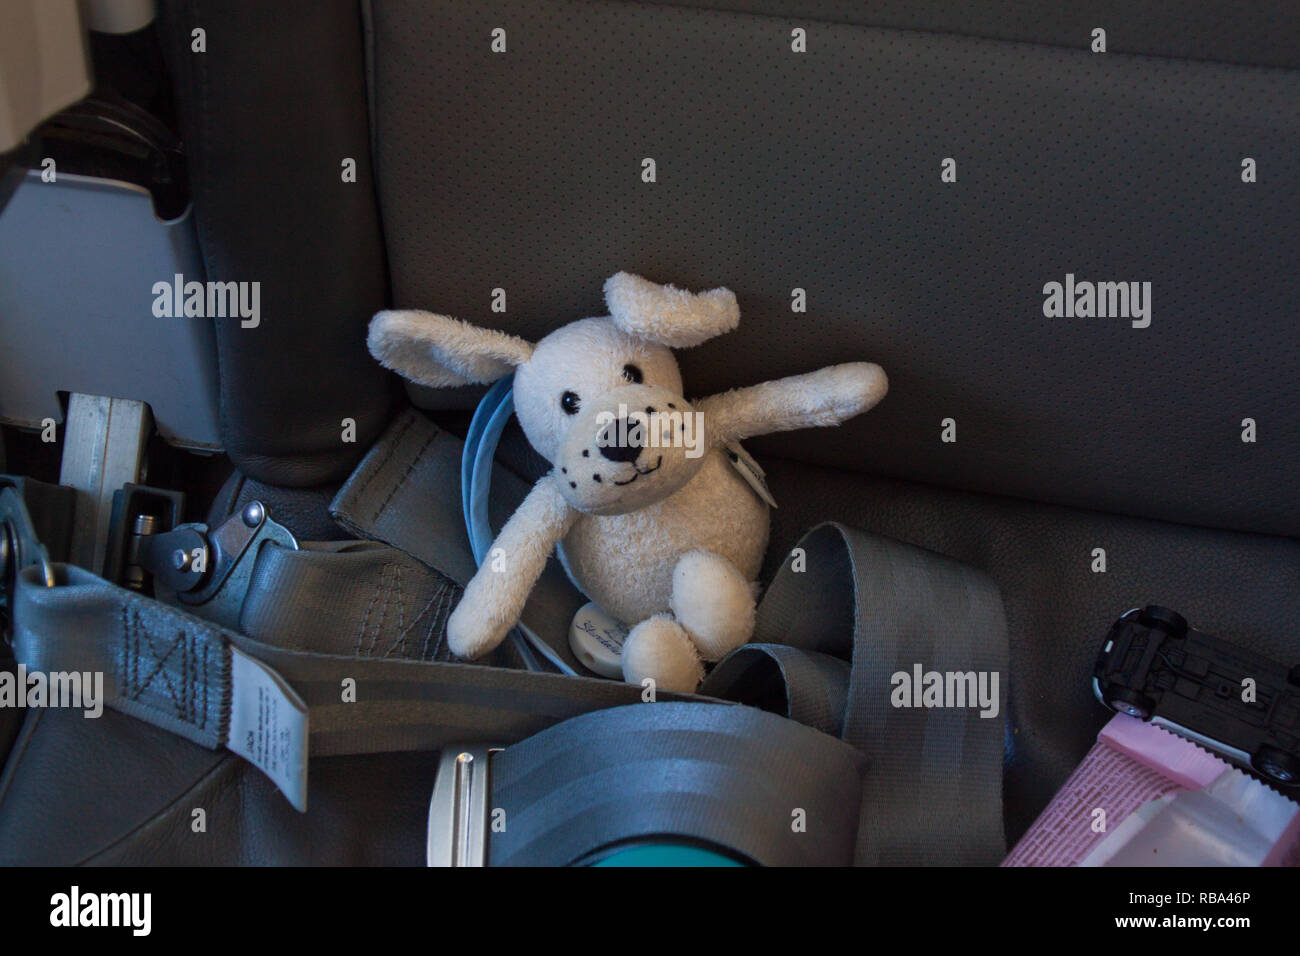 A sole toy dog laying on a plane seat Stock Photo